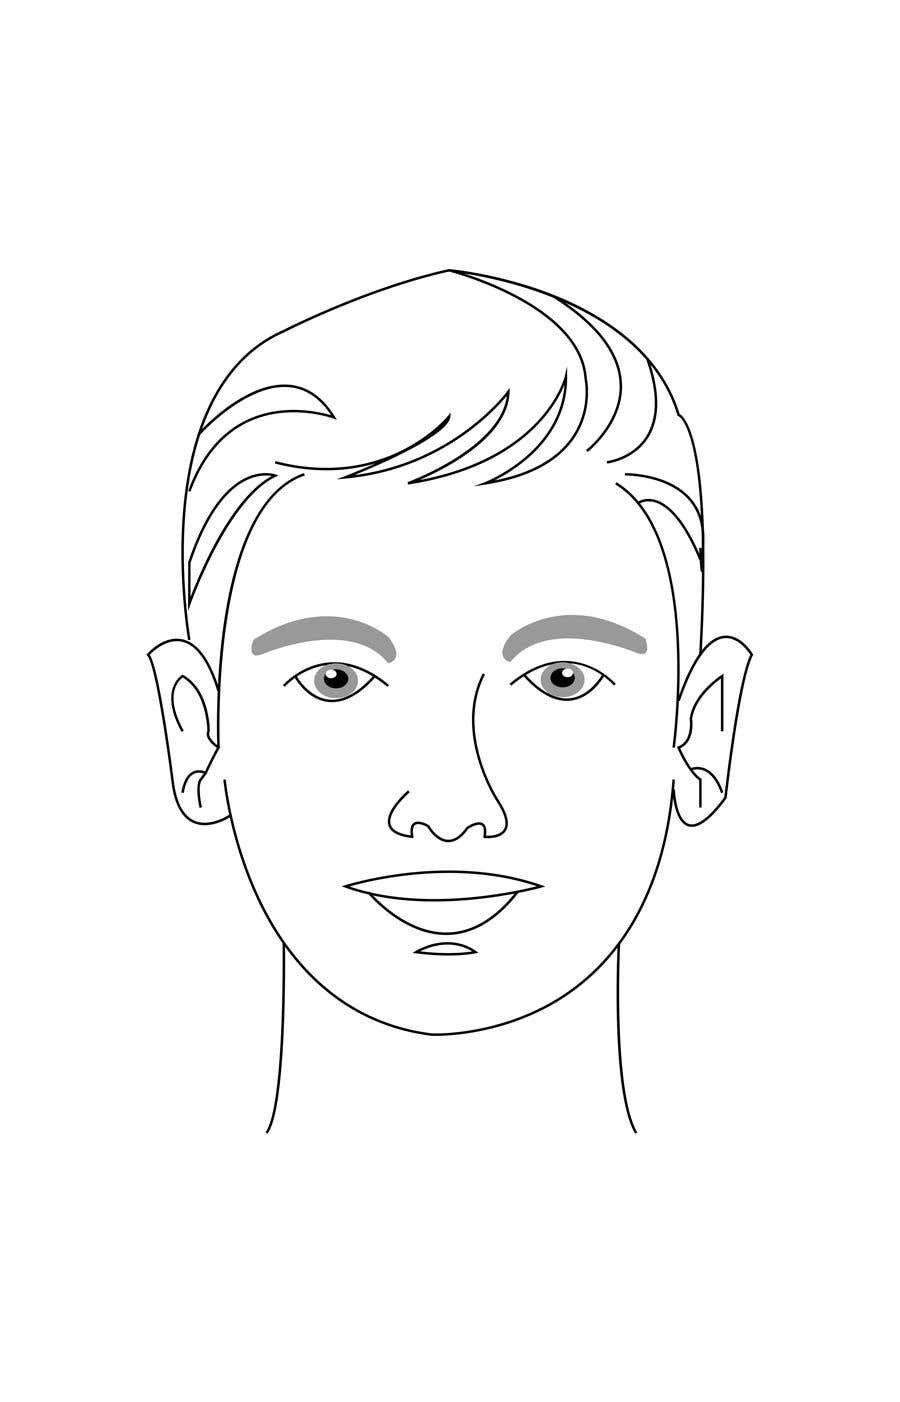 Entry 16 By Prantolatif For Draw A Round Face Shape Of A Man Freelancer You have no angles to your jaw, which is also rounded. draw a round face shape of a man